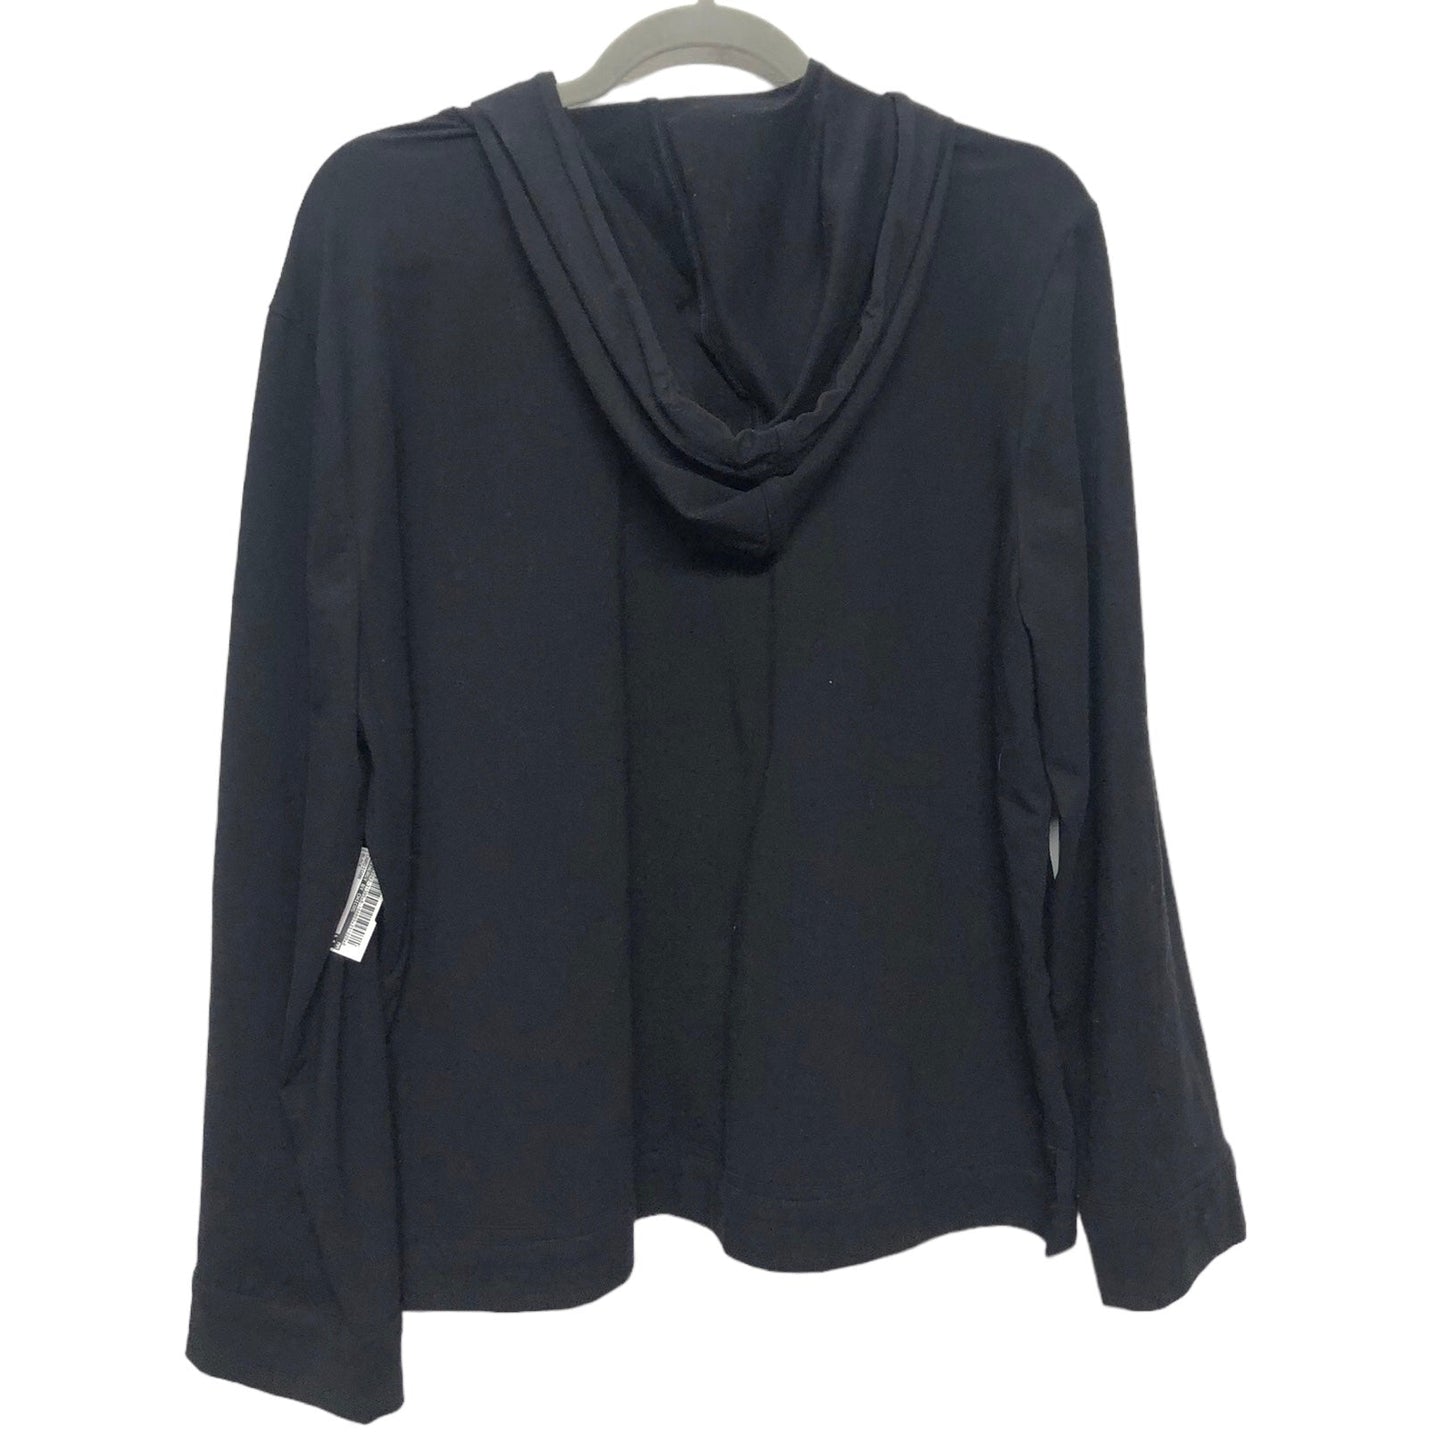 Cardigan By Zenergy By Chicos  Size: 18